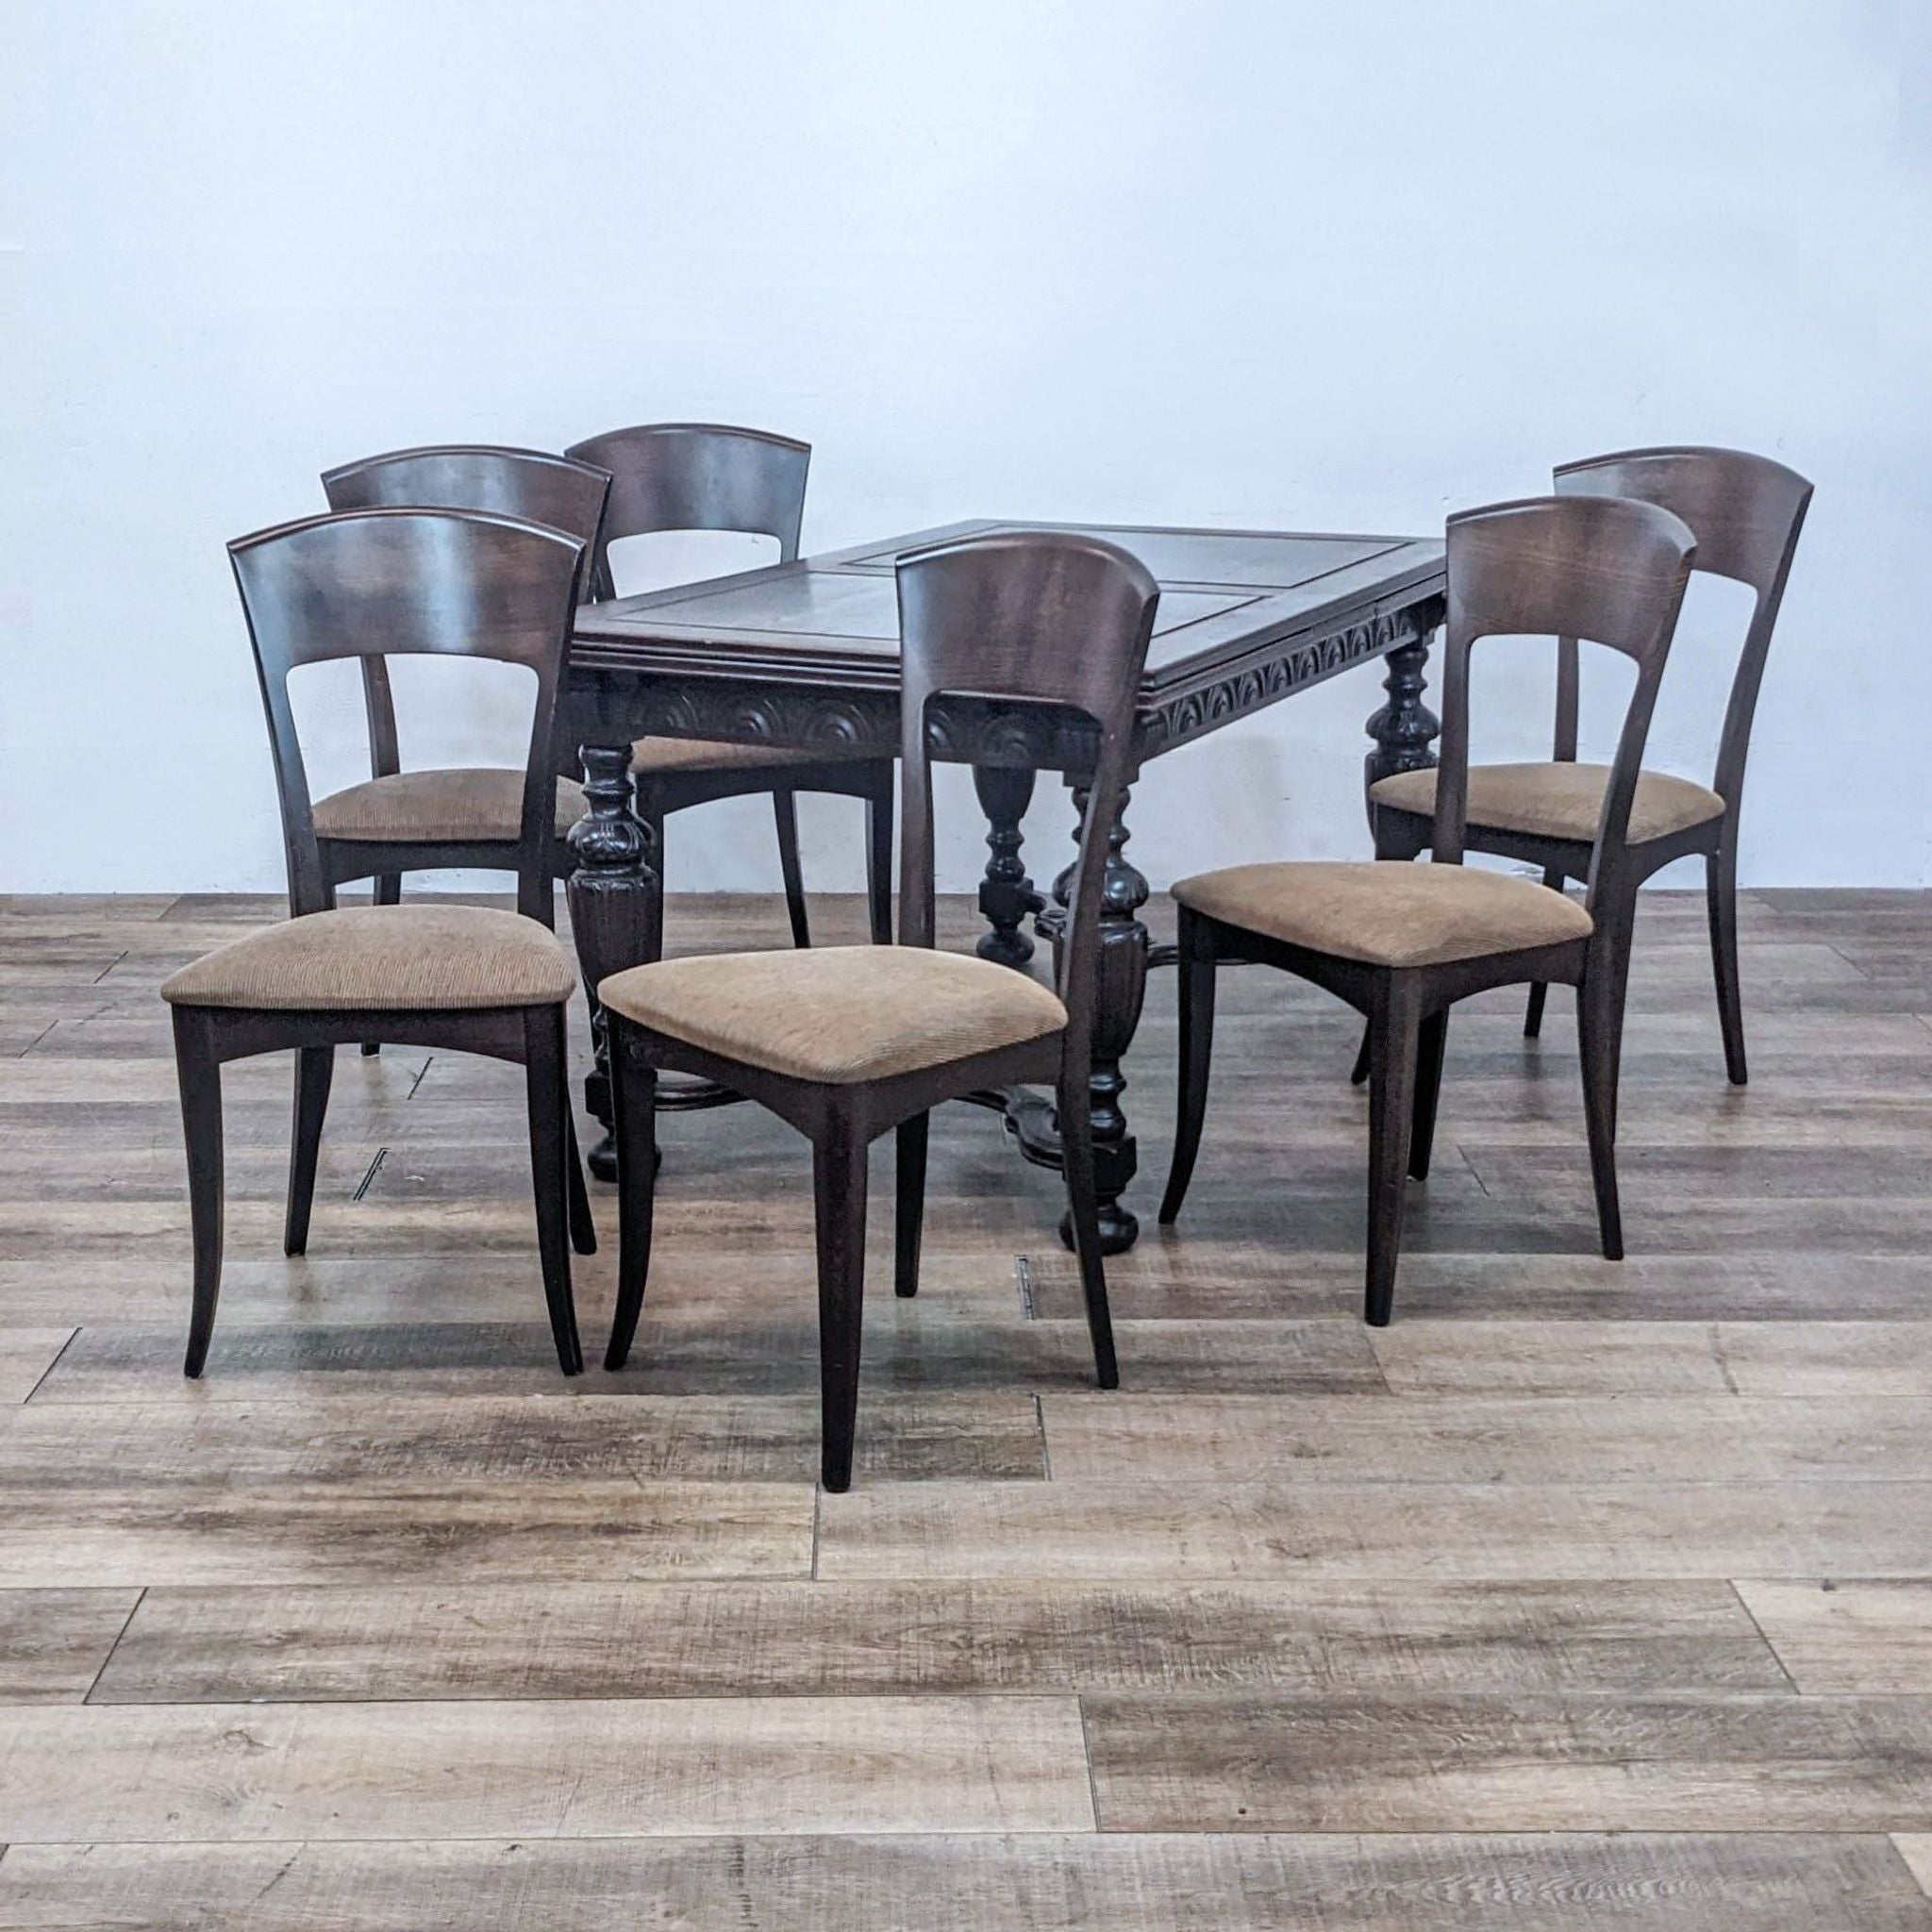 Antique solid wood table with 6 teak chairs by A. Sibau, featuring black upholstery and mid-century design.